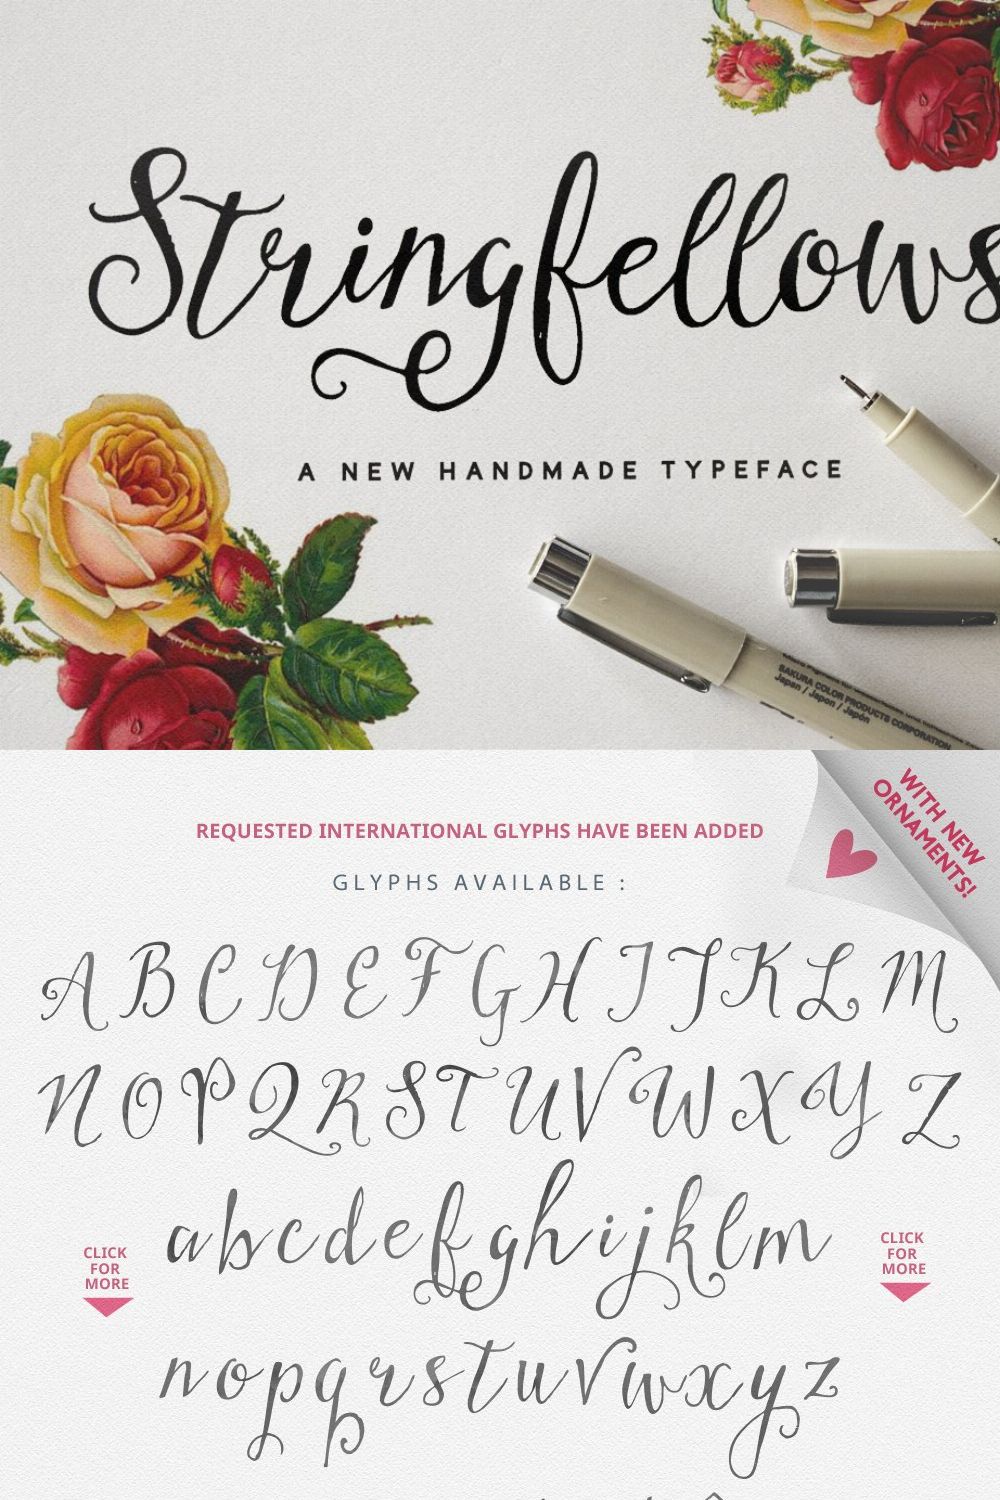 Stringfellows Typeface pinterest preview image.